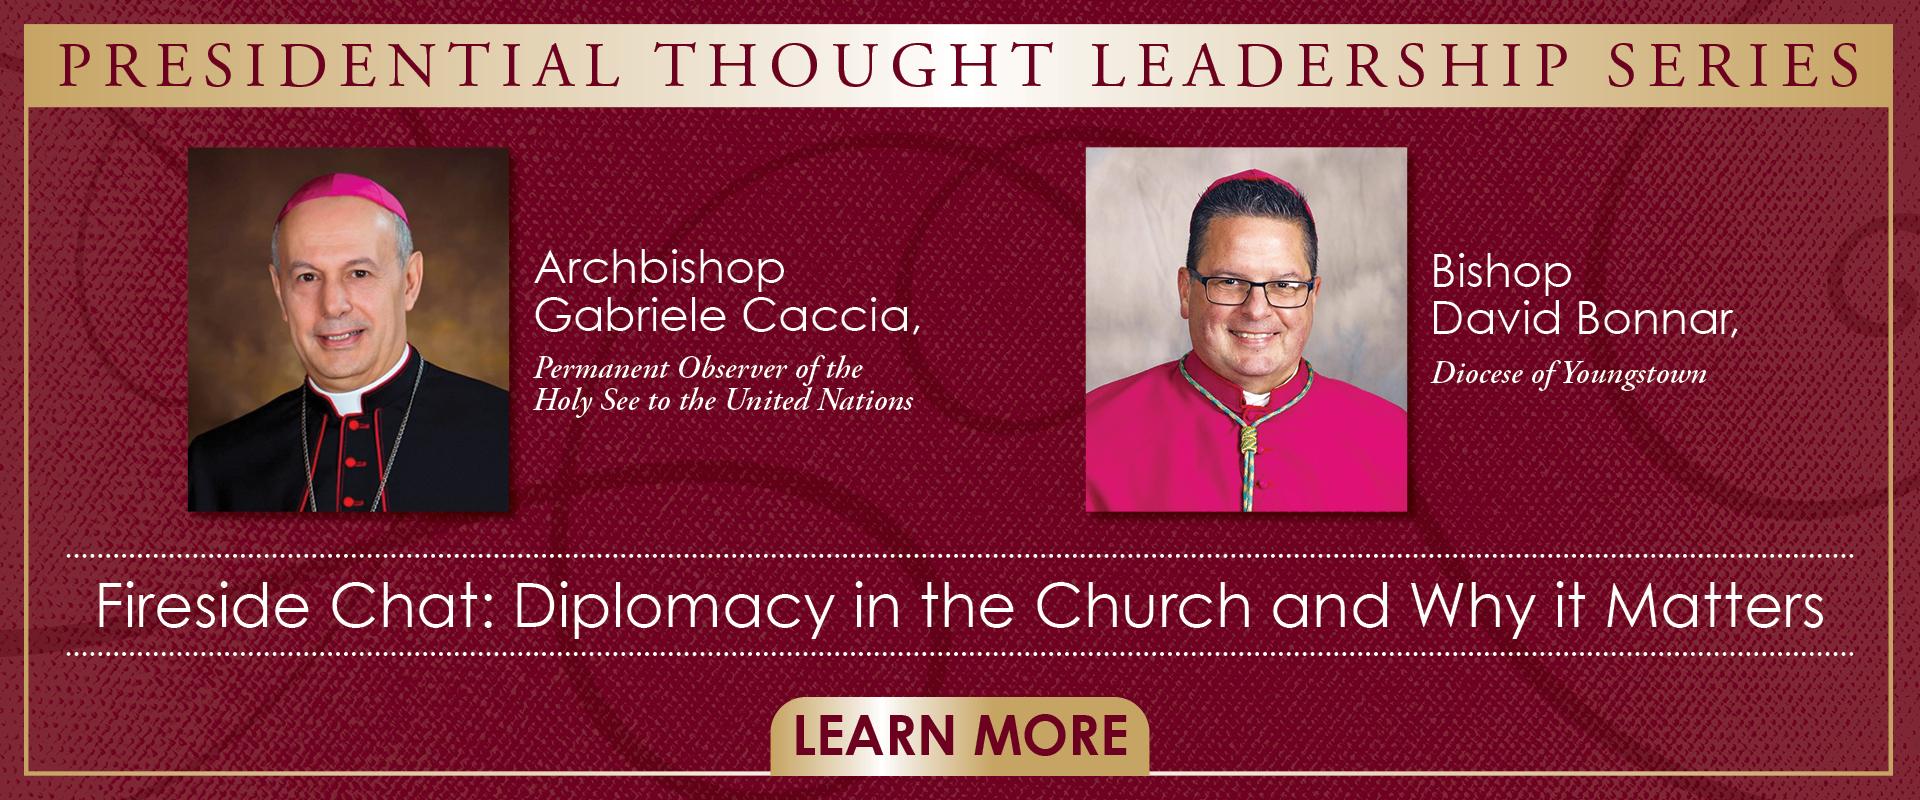 header for Presidential Thought Leadership Series, Fireside Chat: Diplomacy in the Church and Why It Matters featuring Archbishop Gabriele Caccia and Bishop David Bonnar; click to learn more